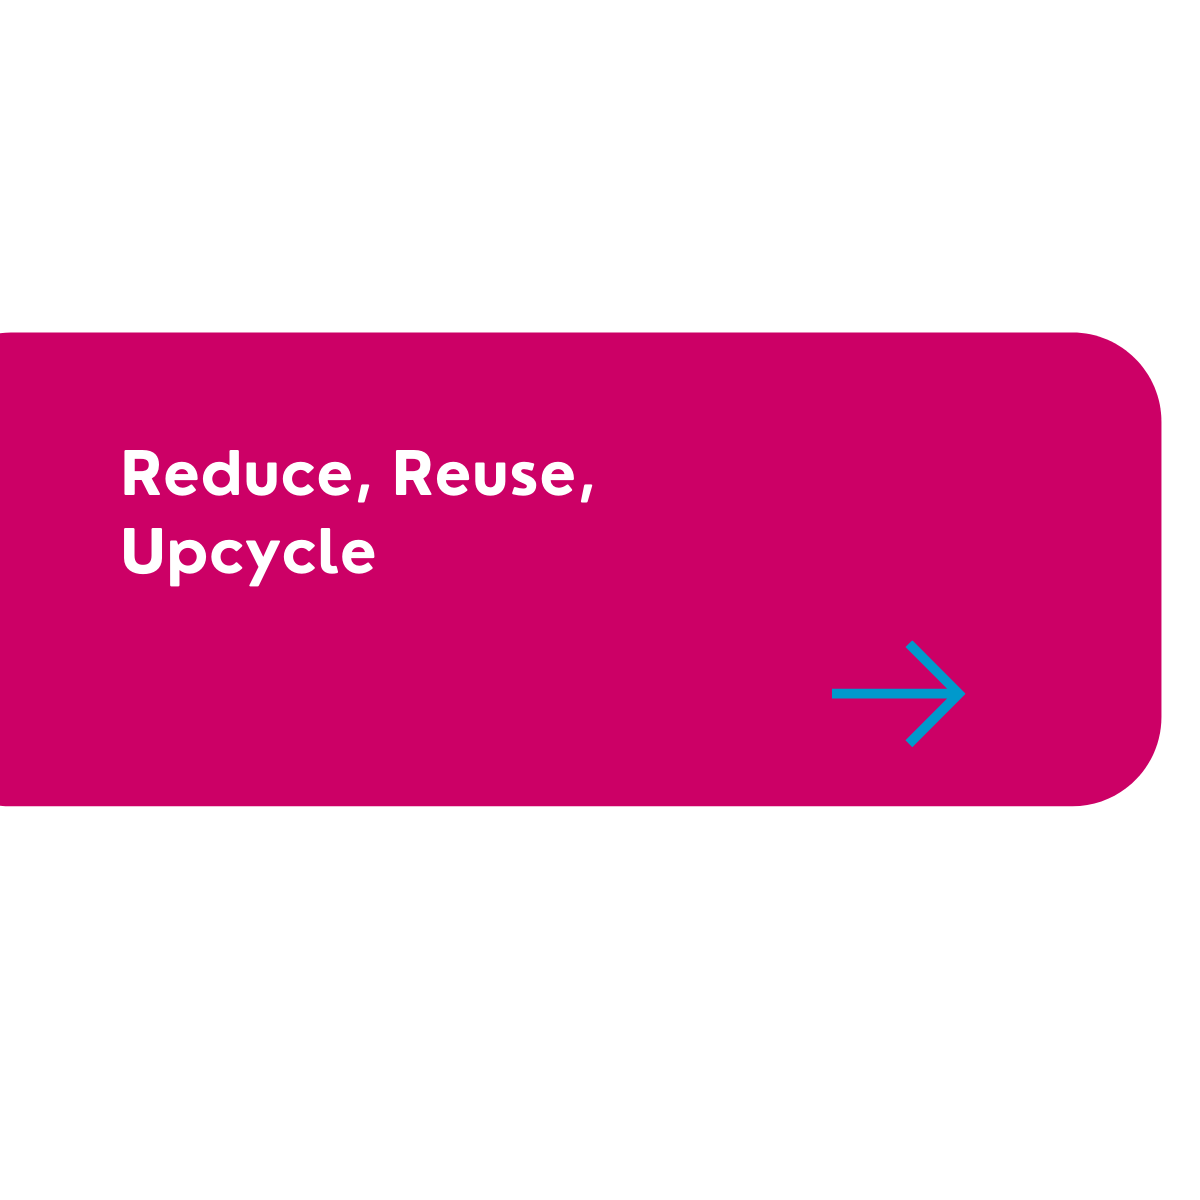 Reduce, Reuse, Upcycle